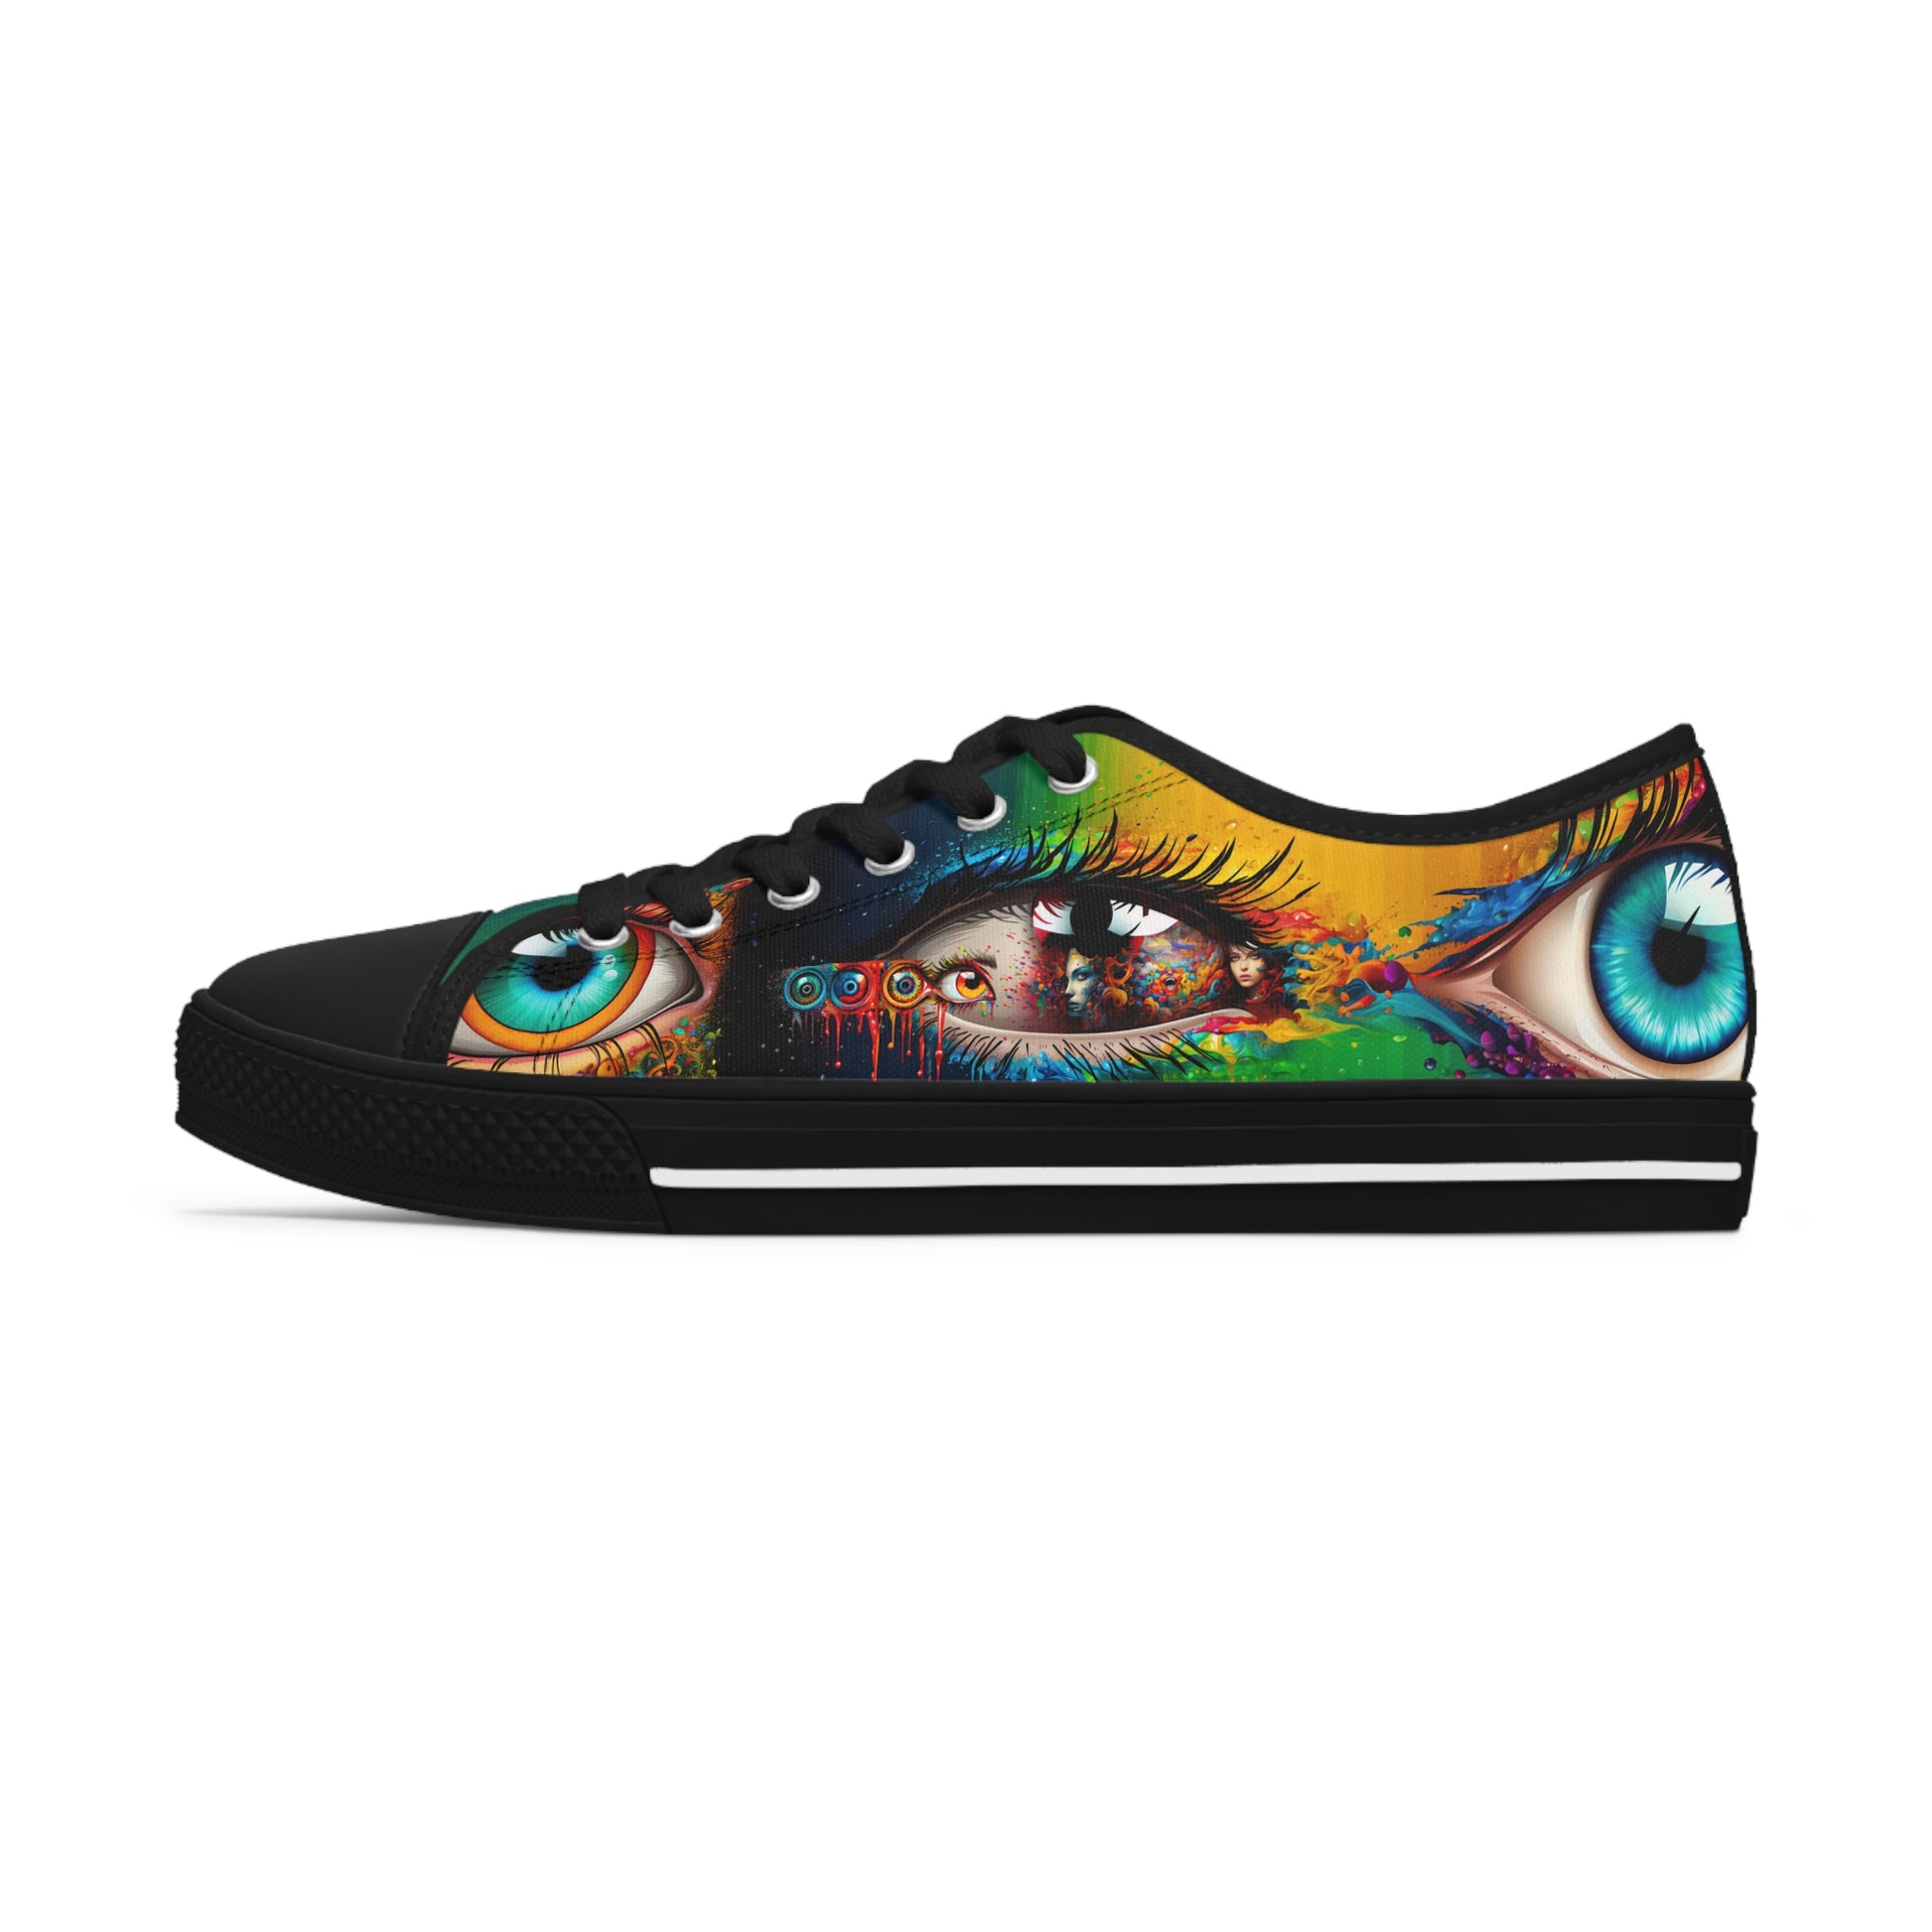 Stashbox Psychedelic Women's Shoes - Vibrant Eyes Design - #FashionStatement #BoldColors #ArtisticSneakers